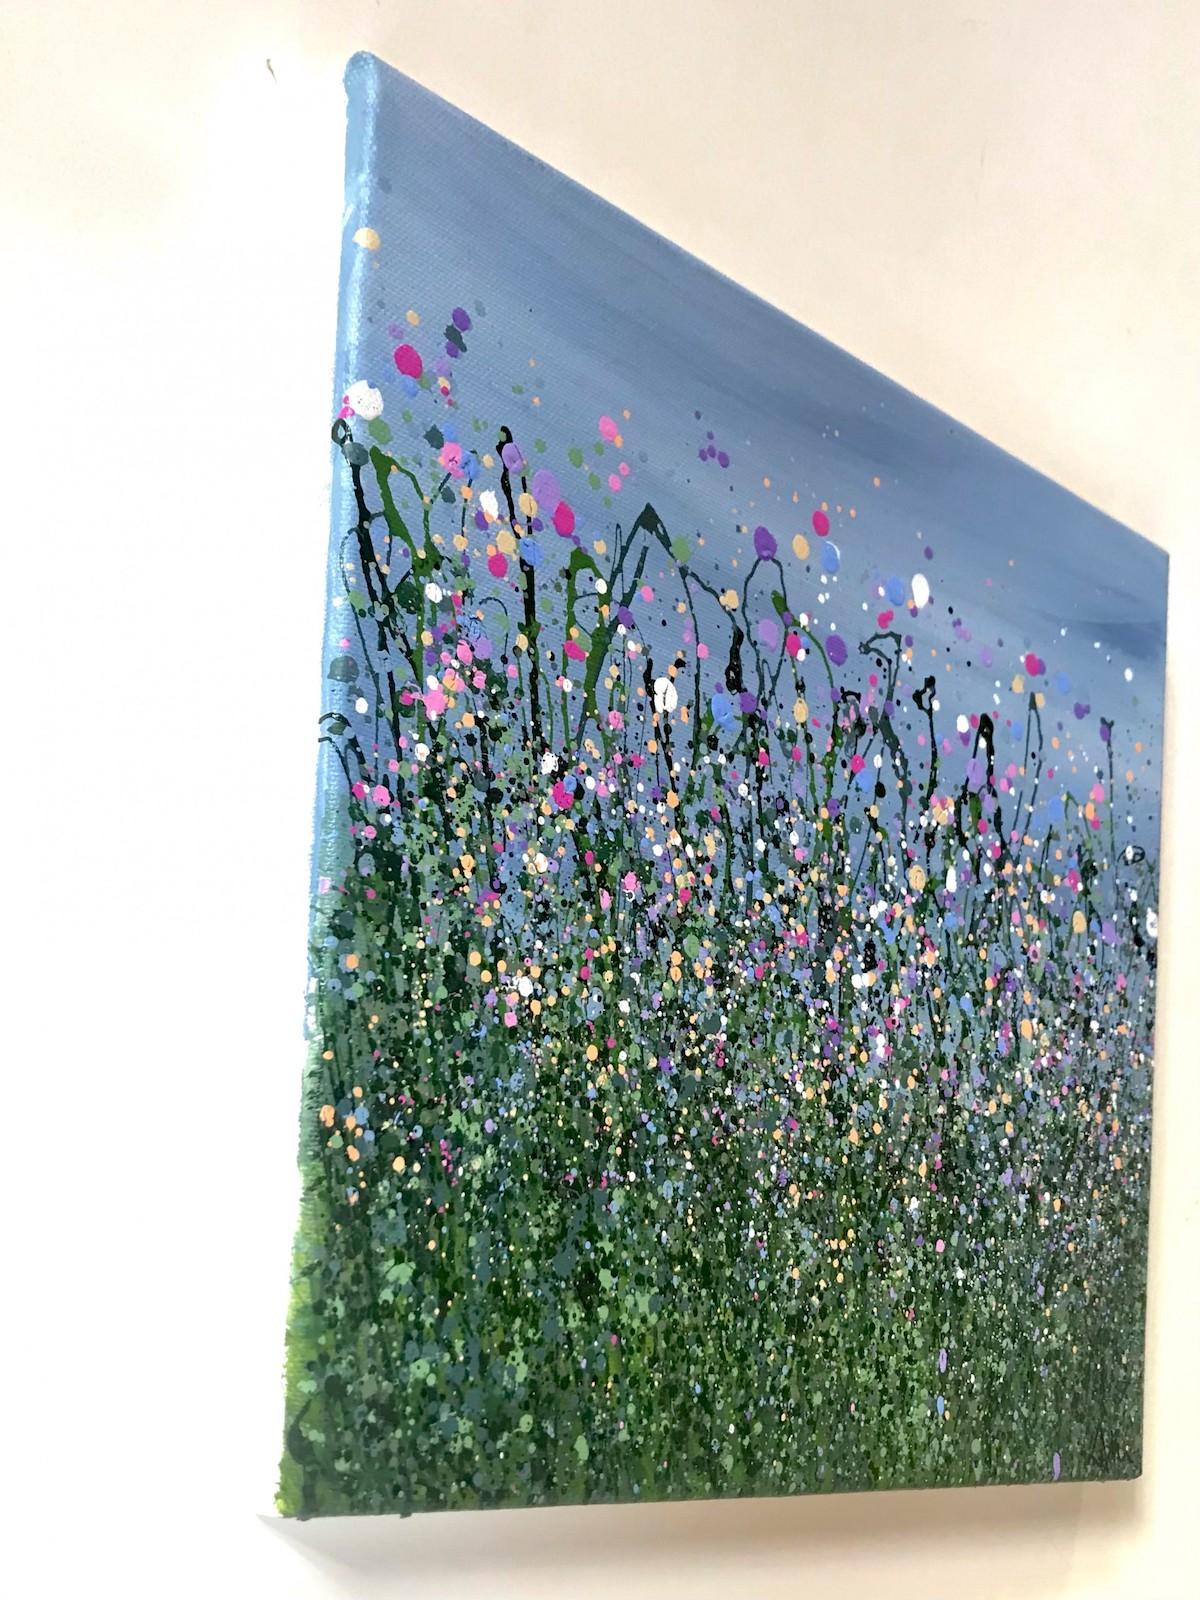 Muted Pink Meadows by Lucy Moore [2022]
original and hand signed by the artist 

Acrylic on Canvas

Image size: H:30 cm x W:30 cm

Complete Size of Unframed Work: H:30 cm x W:30 cm x D:2cm

Sold Unframed

Please note that insitu images are purely an